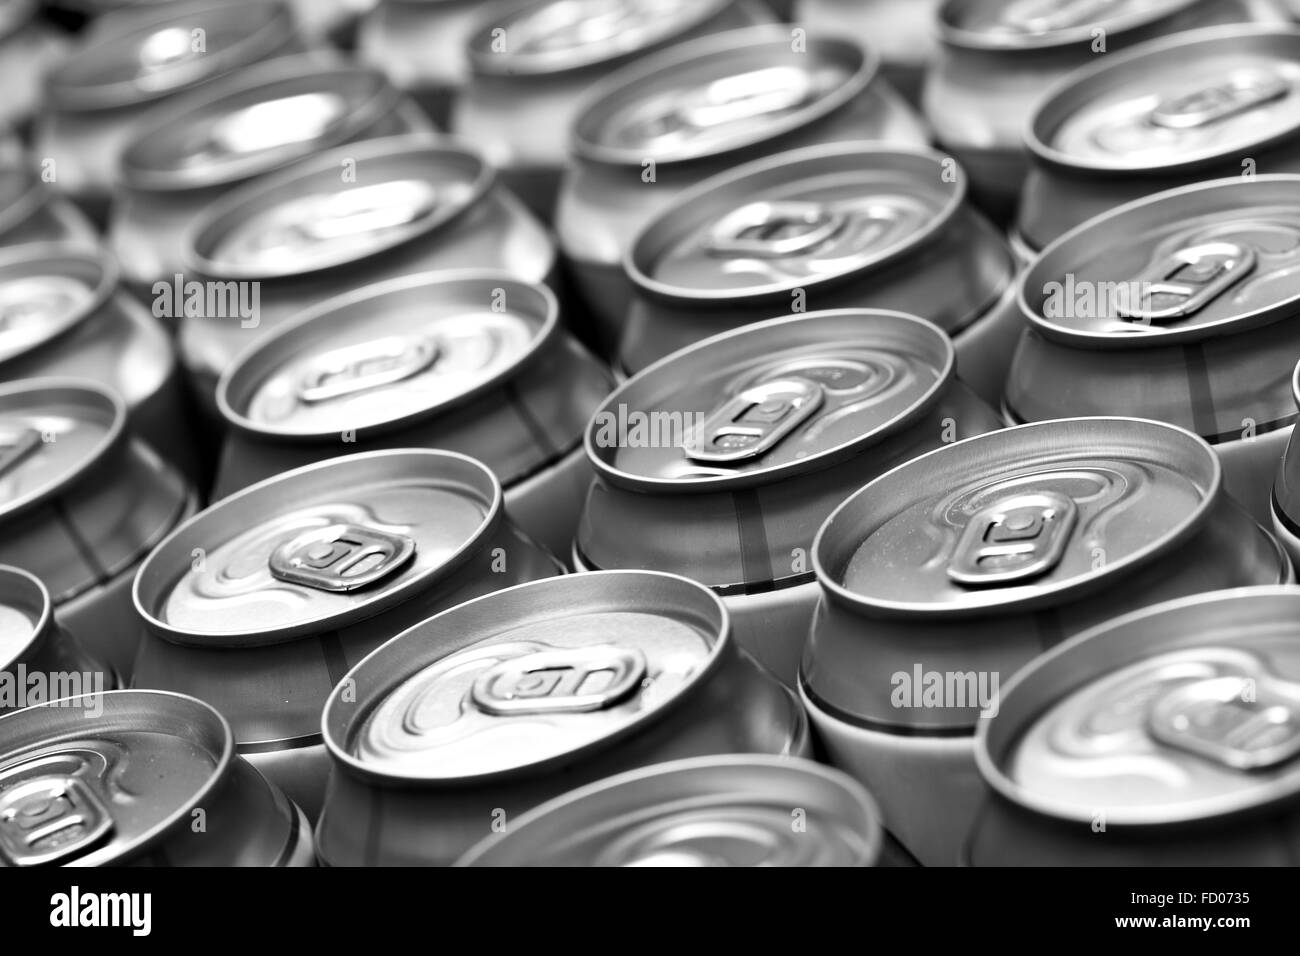 Lots aluminum beer cans. Black and white image. Shallow DOF! Stock Photo